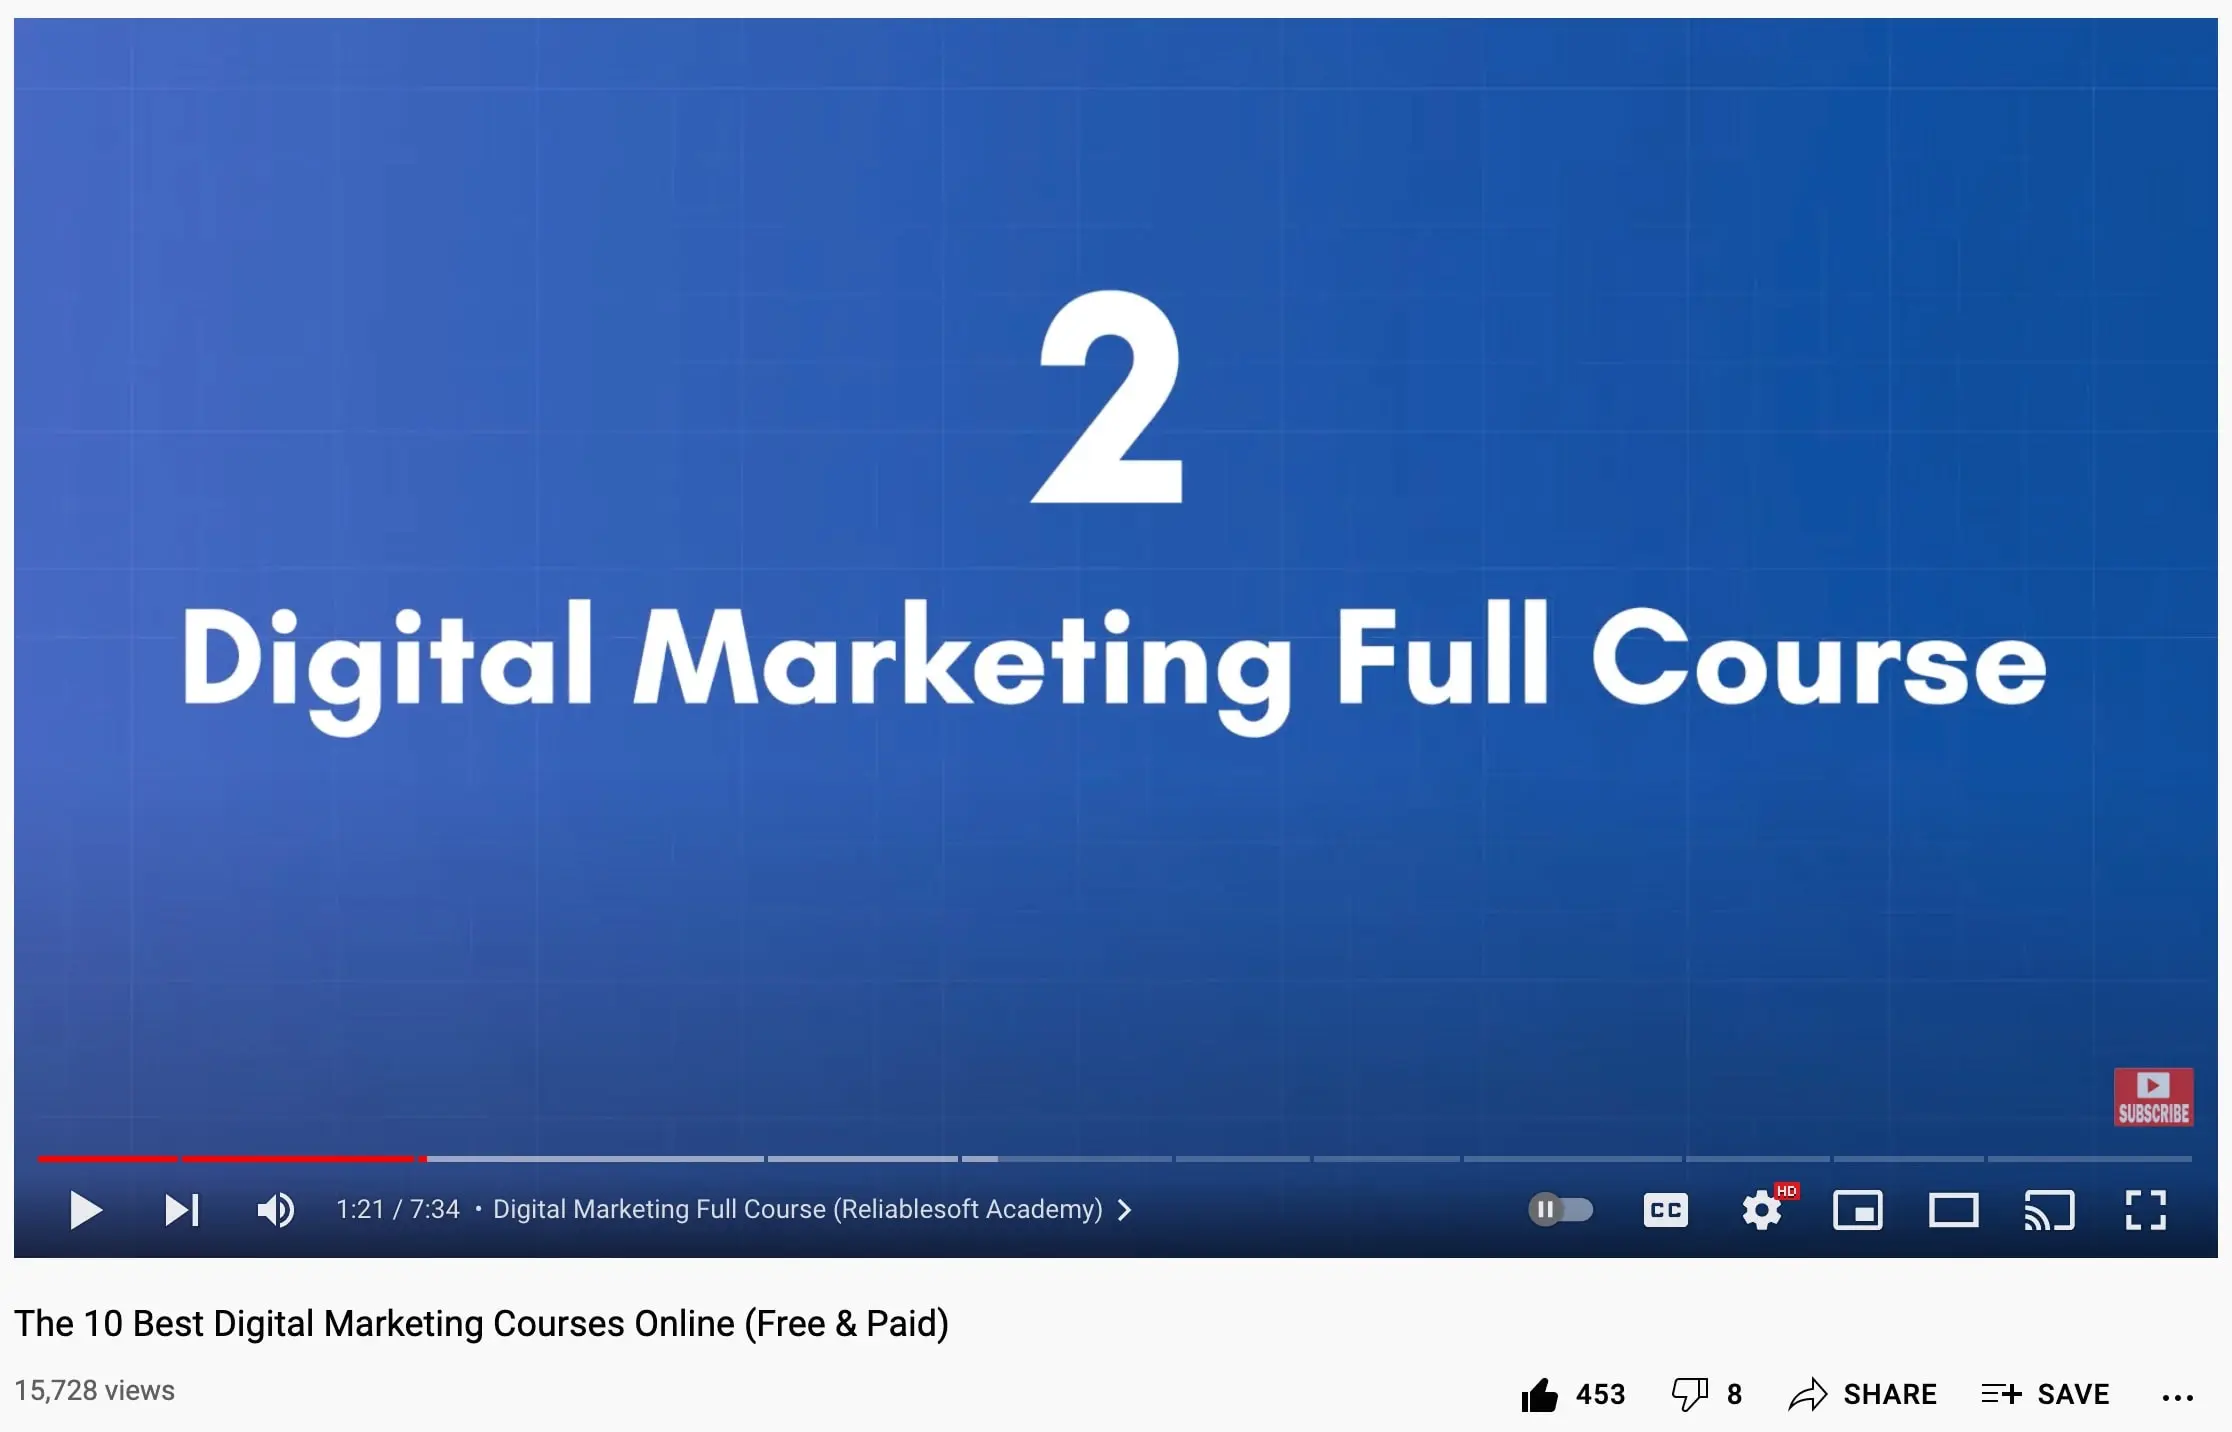 Create a YouTube channel to promote your online course.